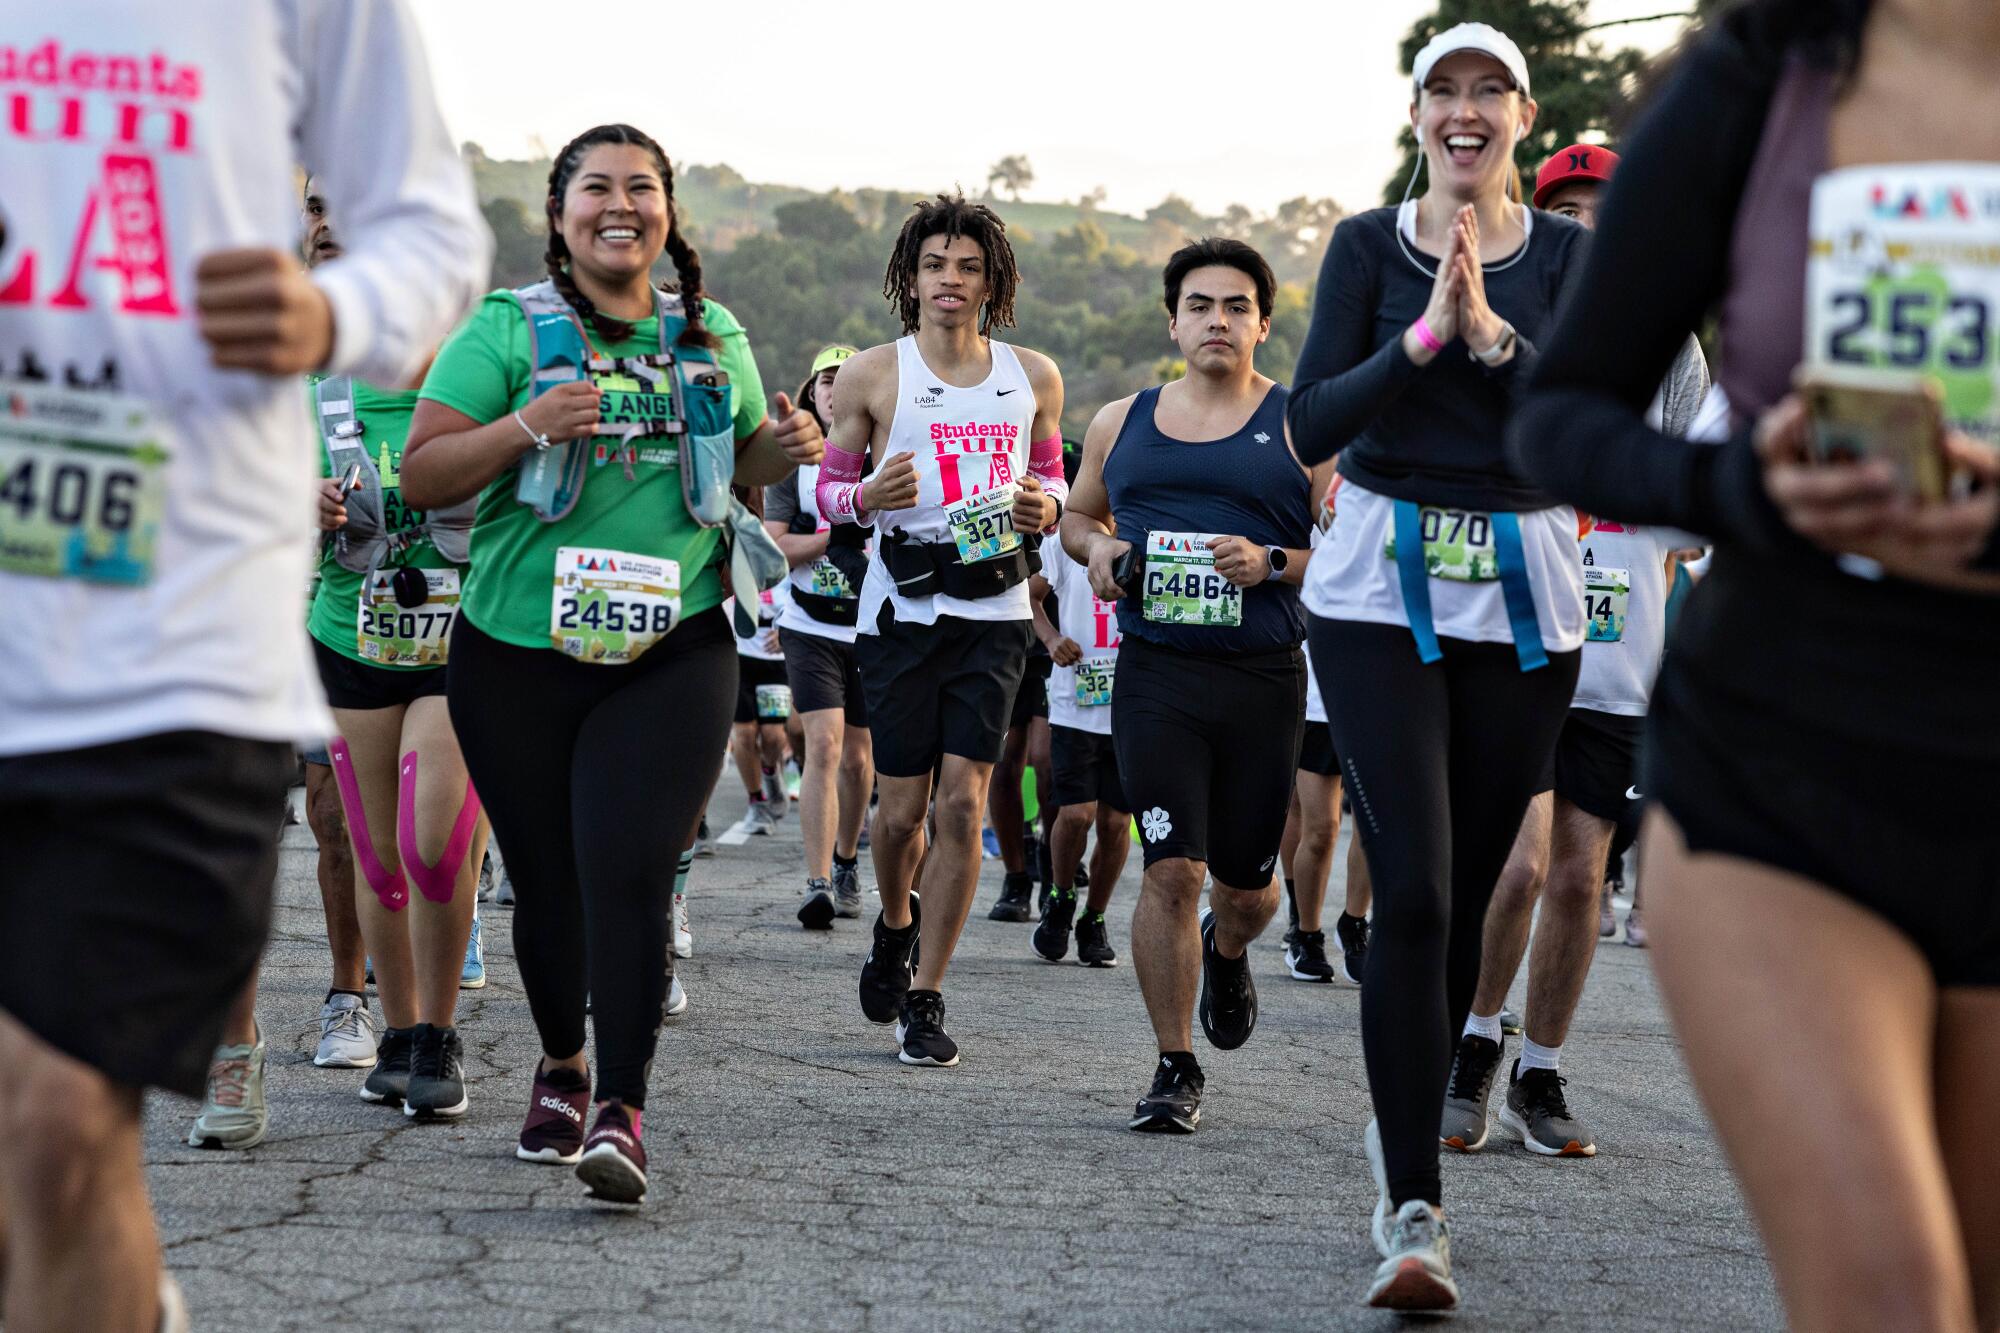 Runners smile as the L.A. Marathon begins.